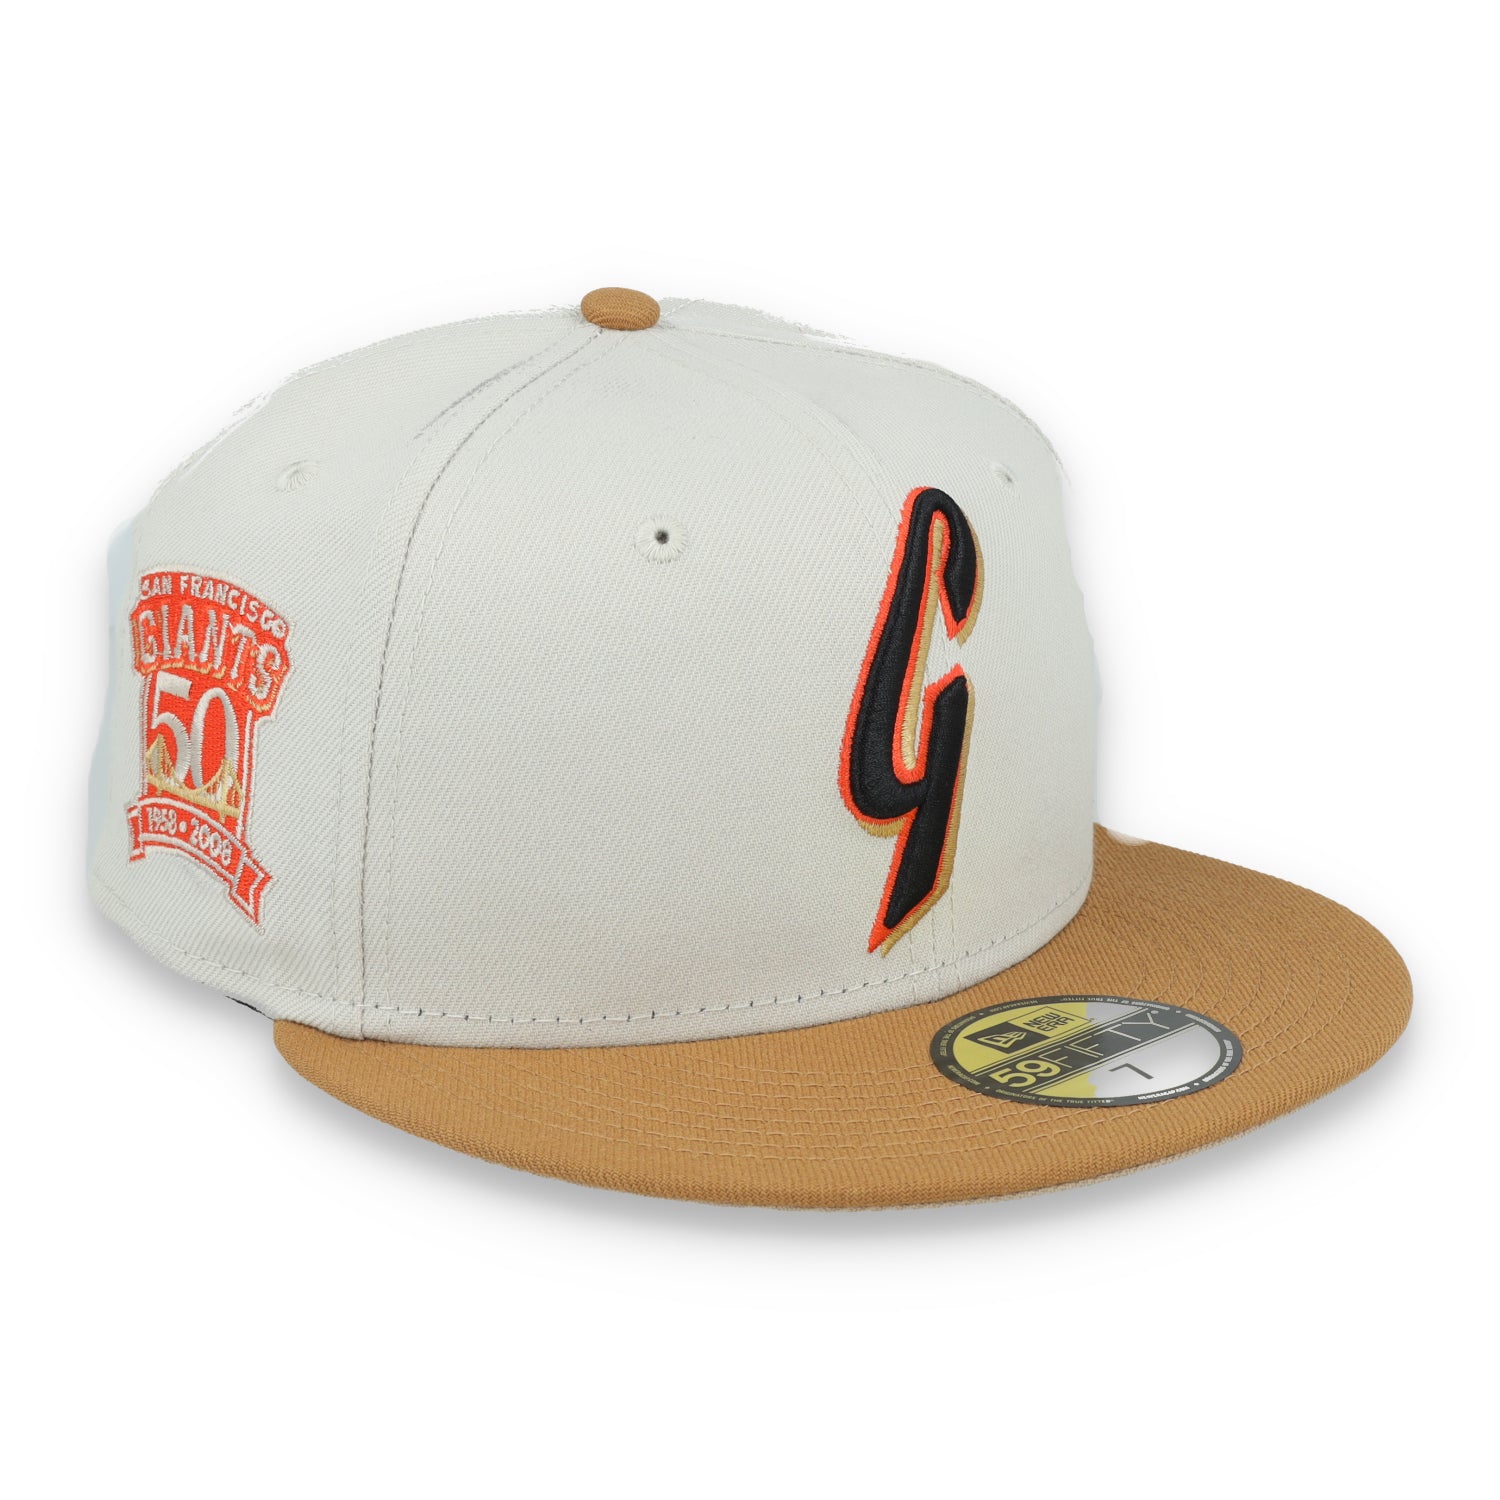 New Era San Francisco Giants 50th Anniversary Side Patch 59IFTY Fitted hat- Chrome/Light Bronze